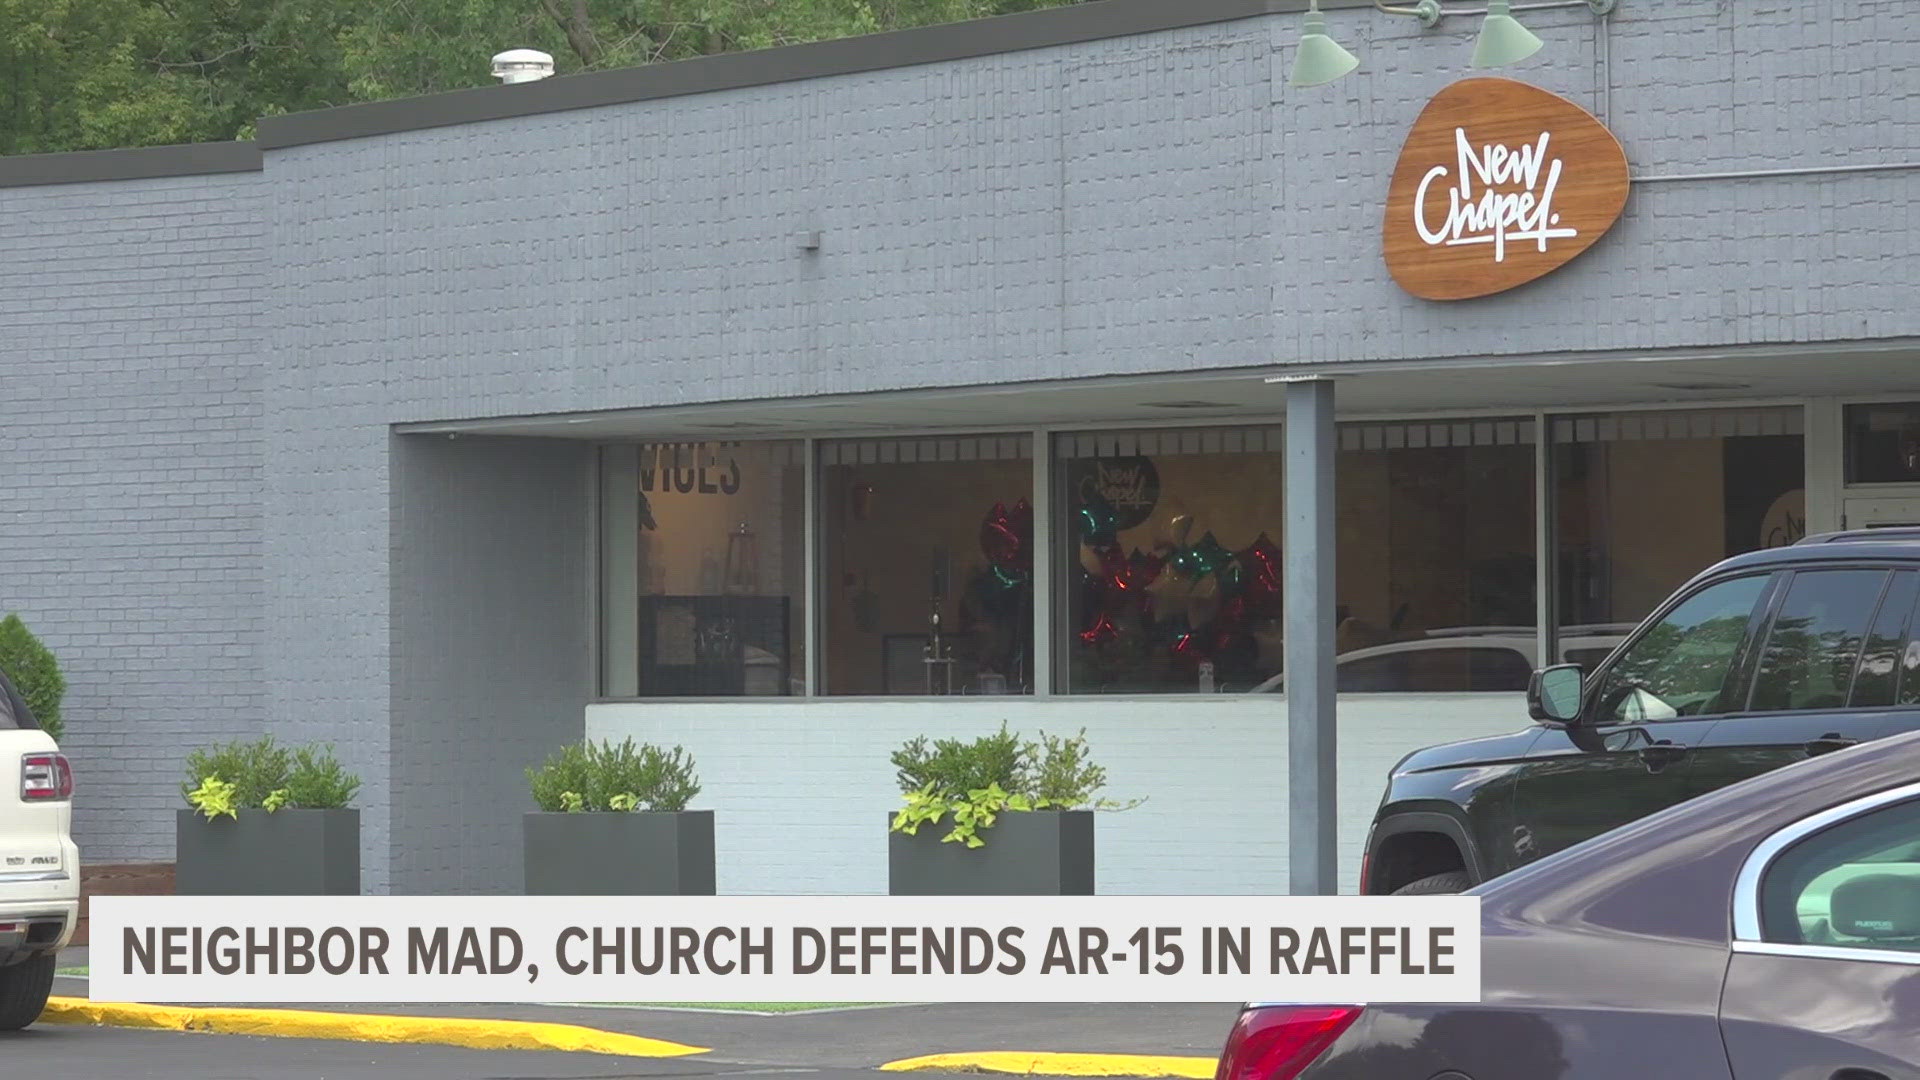 Neighbors said they aren't comfortable with a gun being given away as a prize. The pastor said it's all about expressing peoples' freedoms in a safe way.